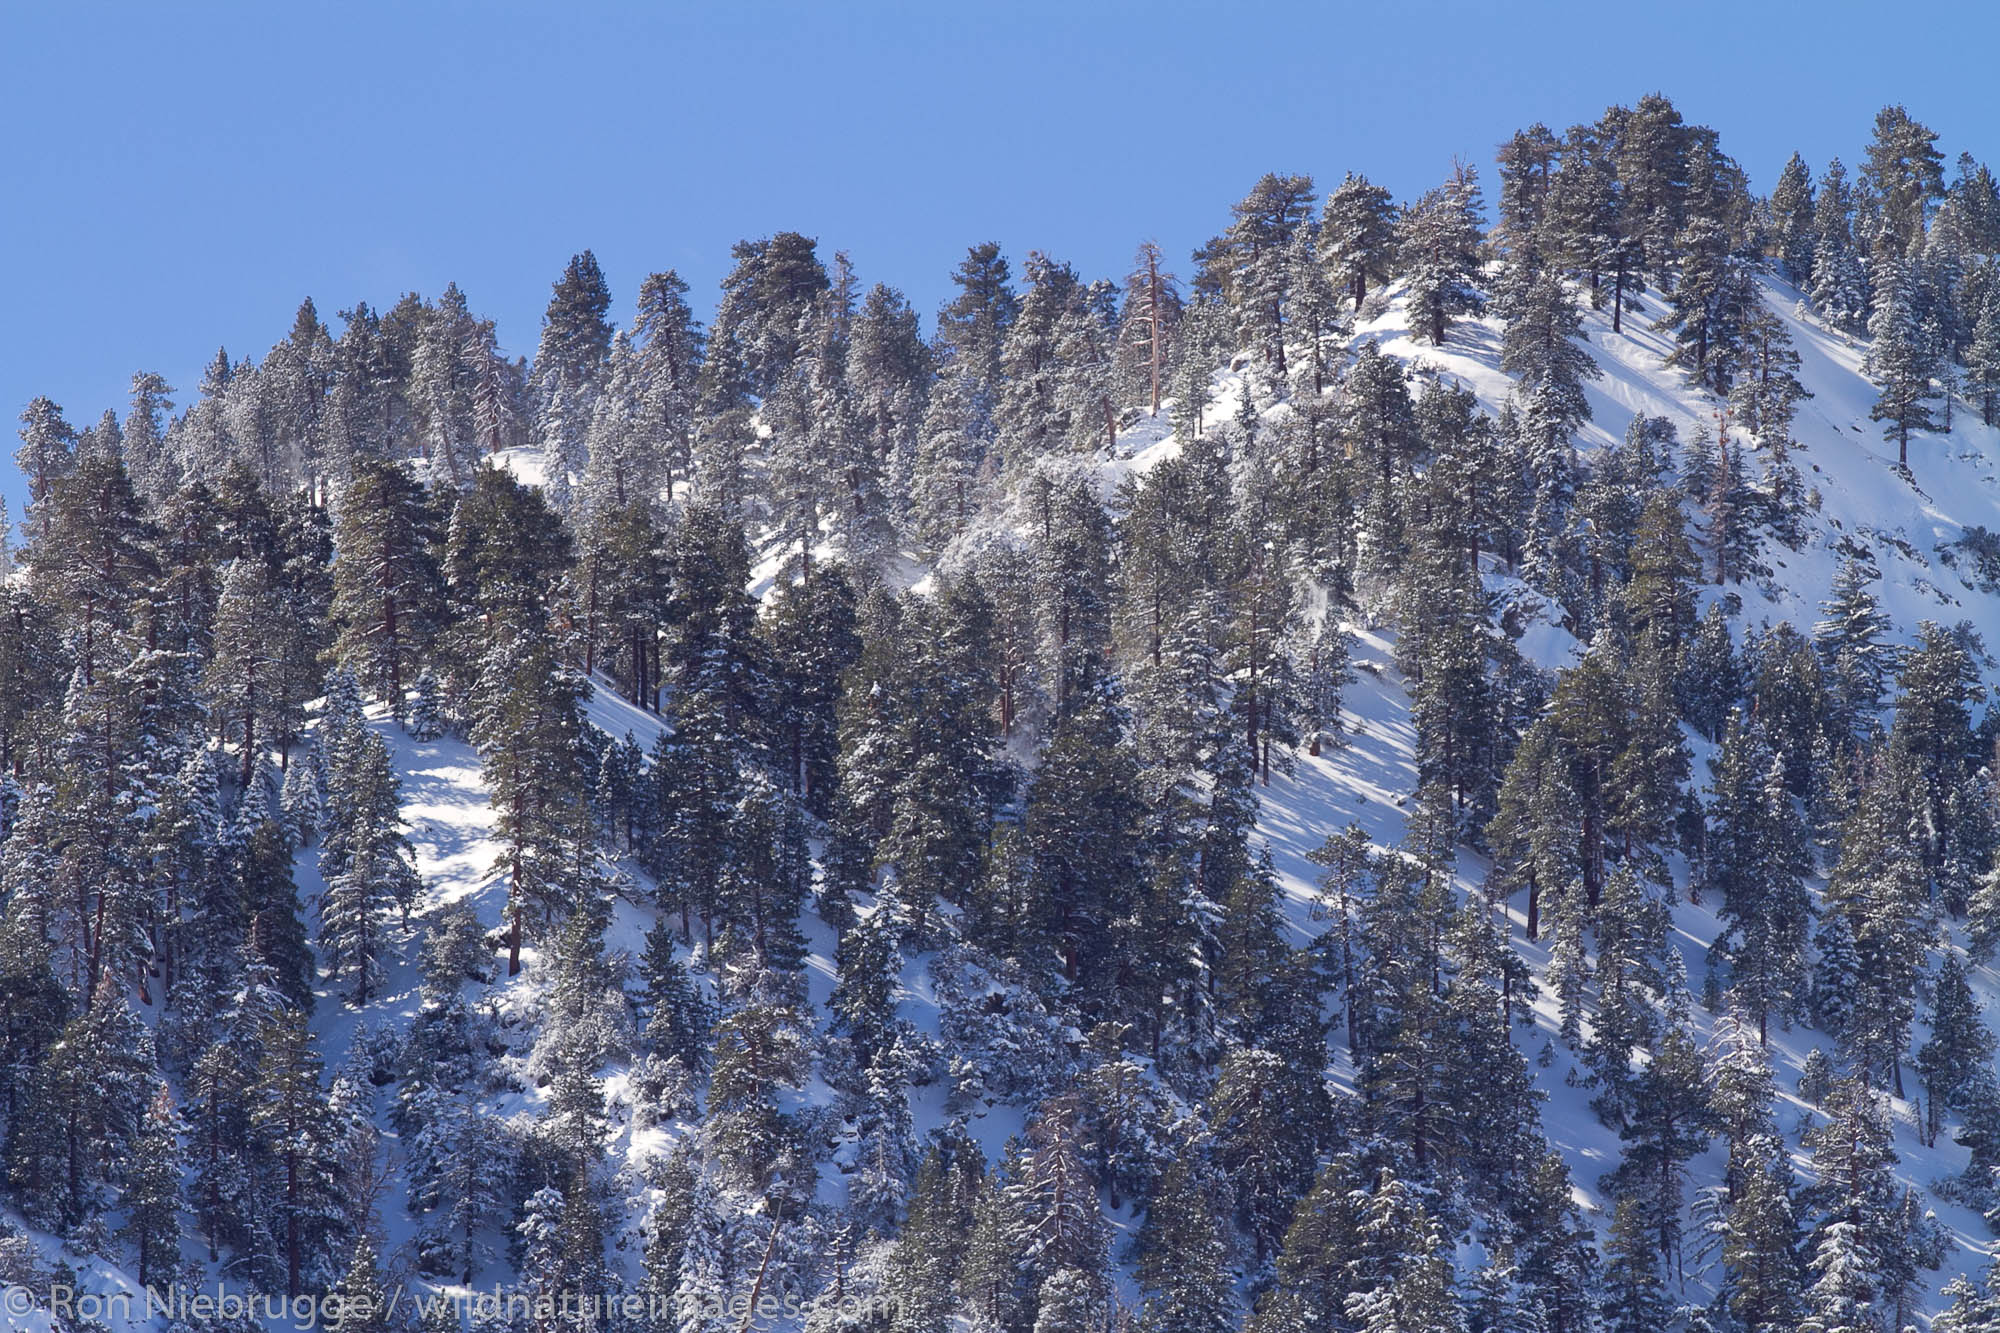 Winter trees in Wrightwood, California.